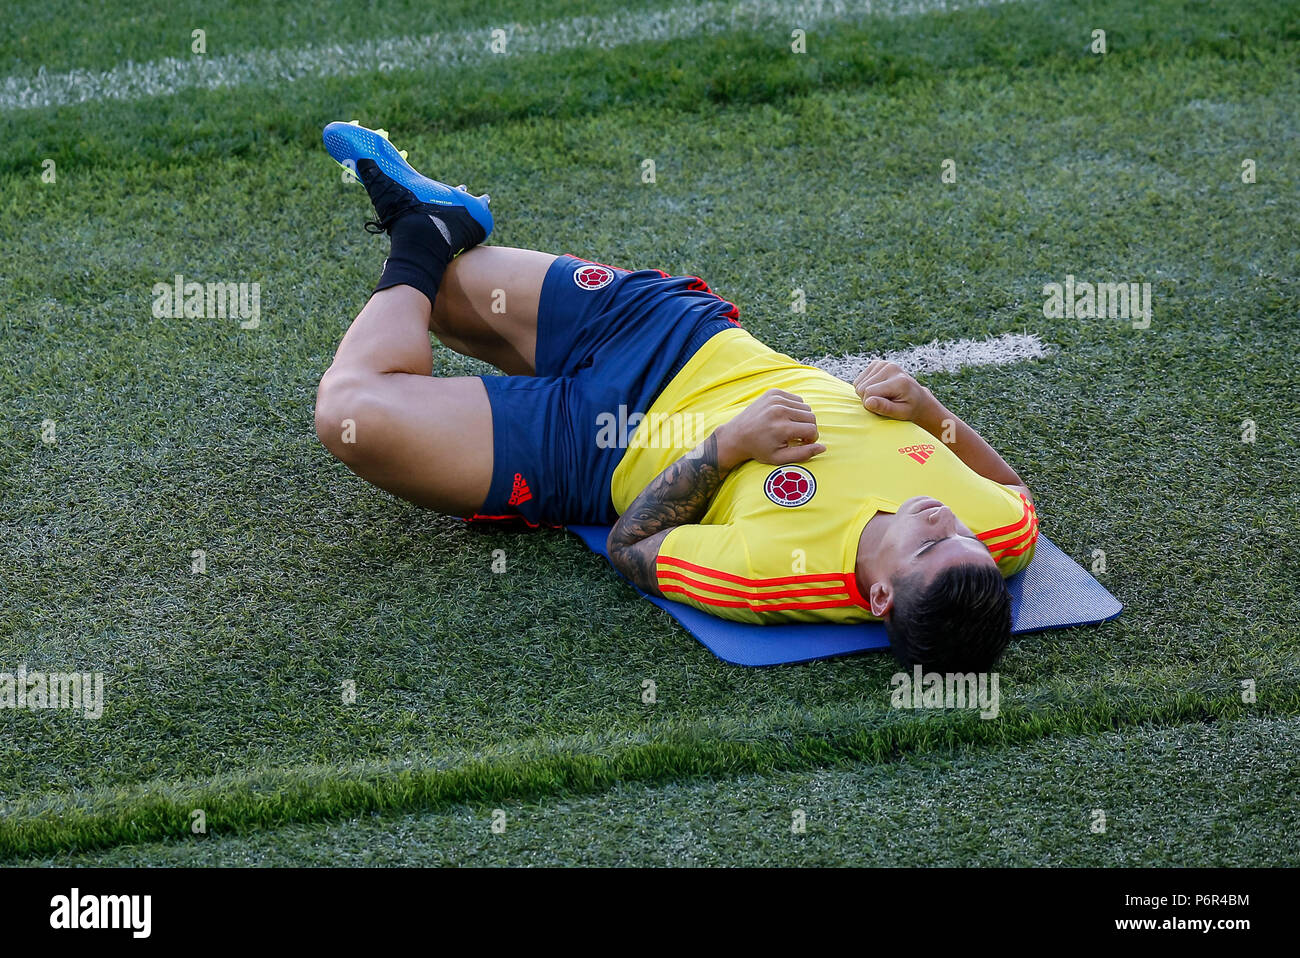 Moscow, Russia. 2nd July 2018. James Rodriguez of Colombia sits out and stretches during a Colombia training session, prior to their 2018 FIFA World Cup Round of 16 match against England, at Spartak Stadium on July 2nd 2018 in Moscow, Russia. Credit: PHC Images/Alamy Live News Stock Photo